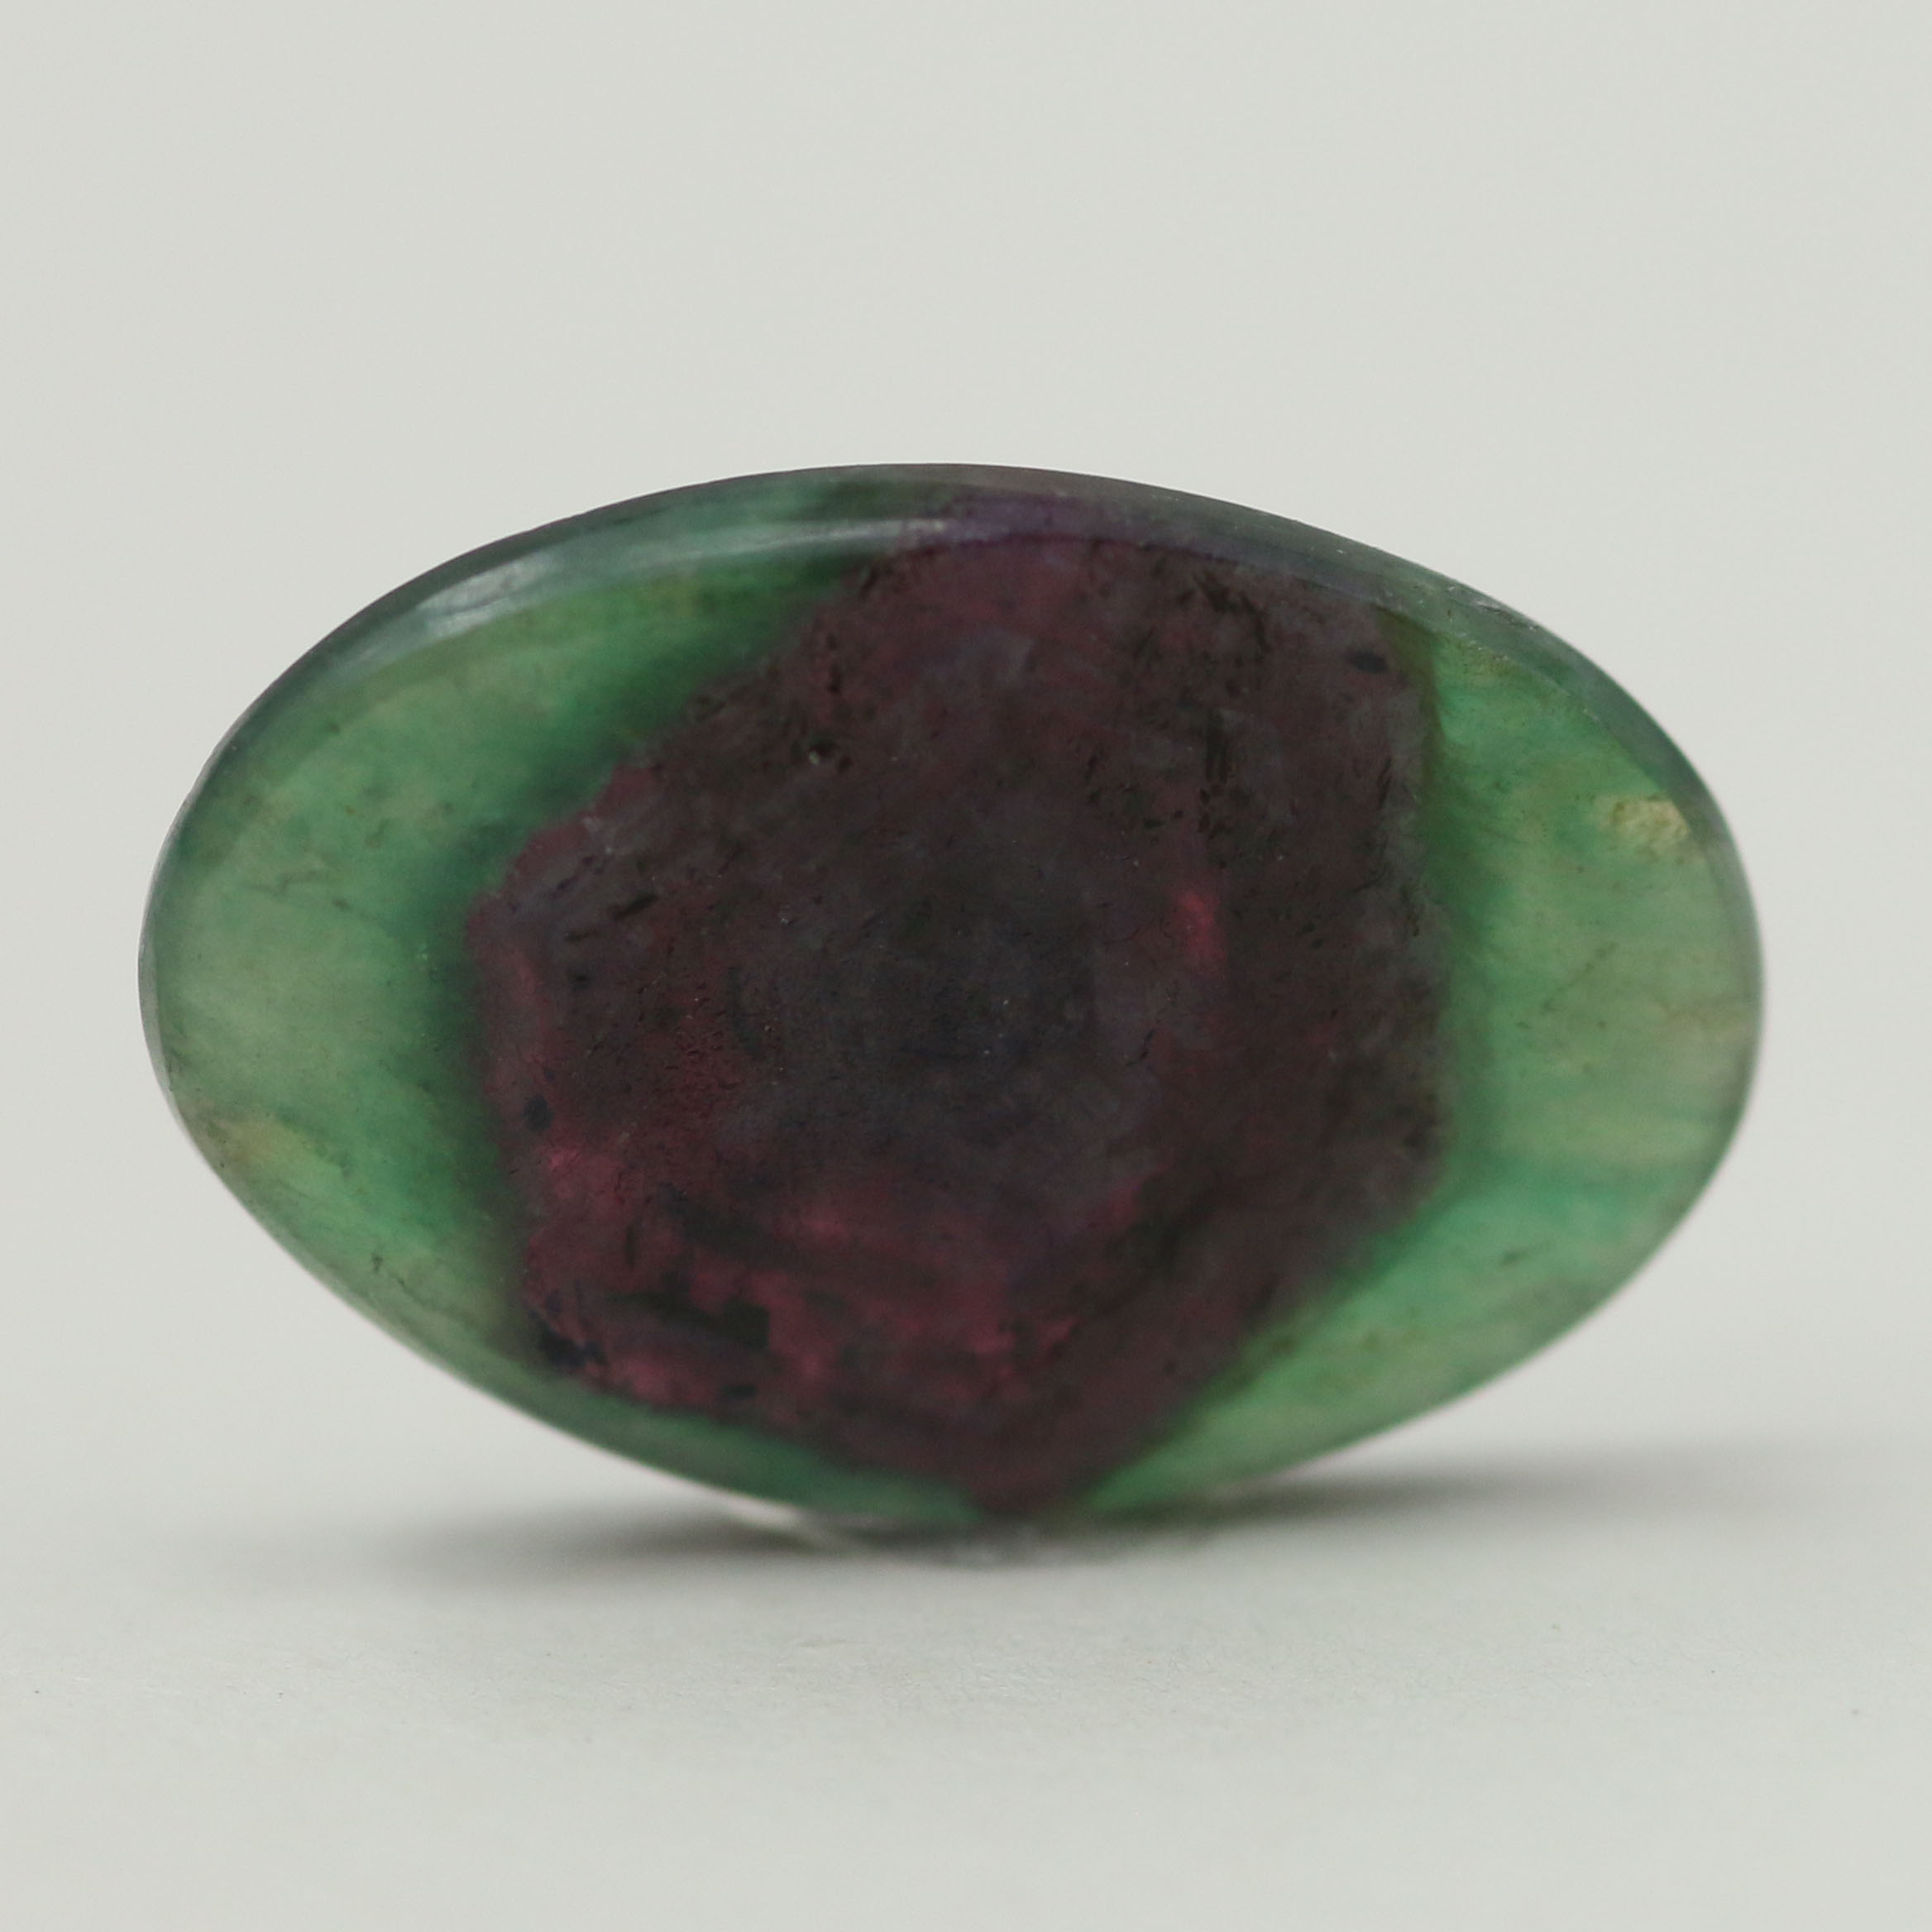 RUBY & ZOISITE 16.5X11 OVAL 5.33CT